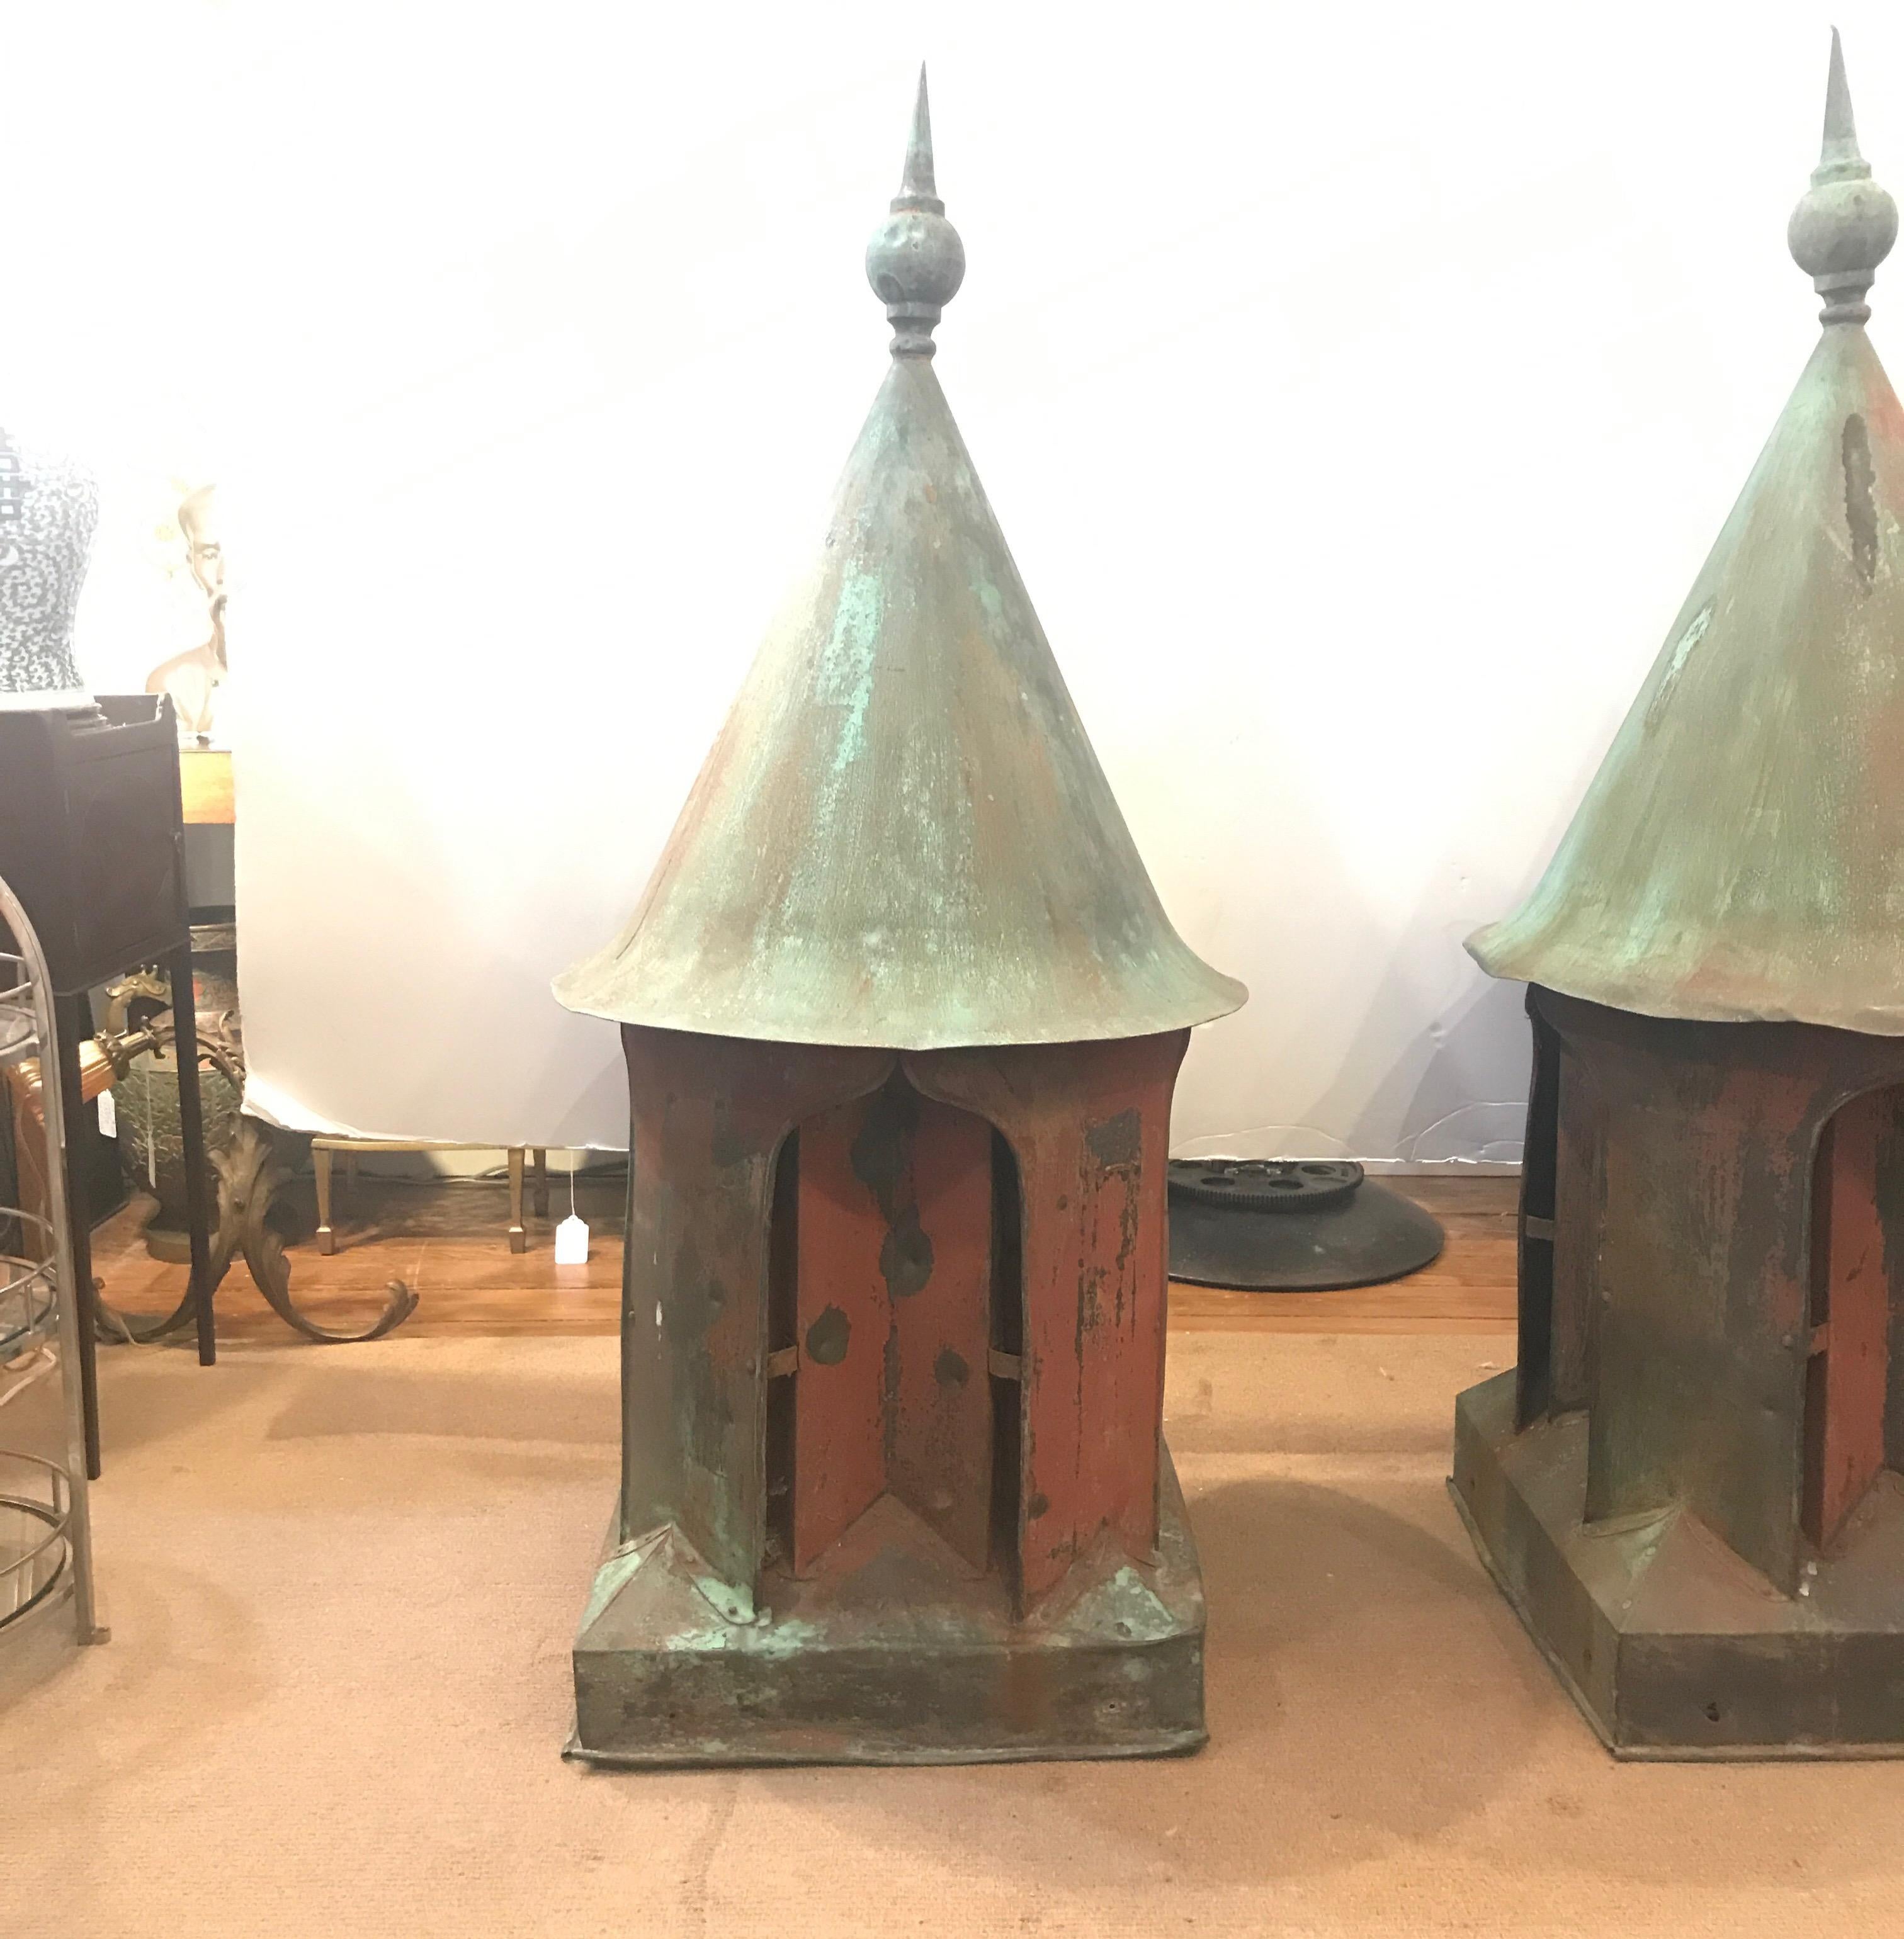 Impressive pair of antique English copper cupolas circa 1850s. The spire finial tops with round cone roofs over four sides with an arched opening. Each one with a label attached Ewart & Son Ltd, this company was responsible for the roof at